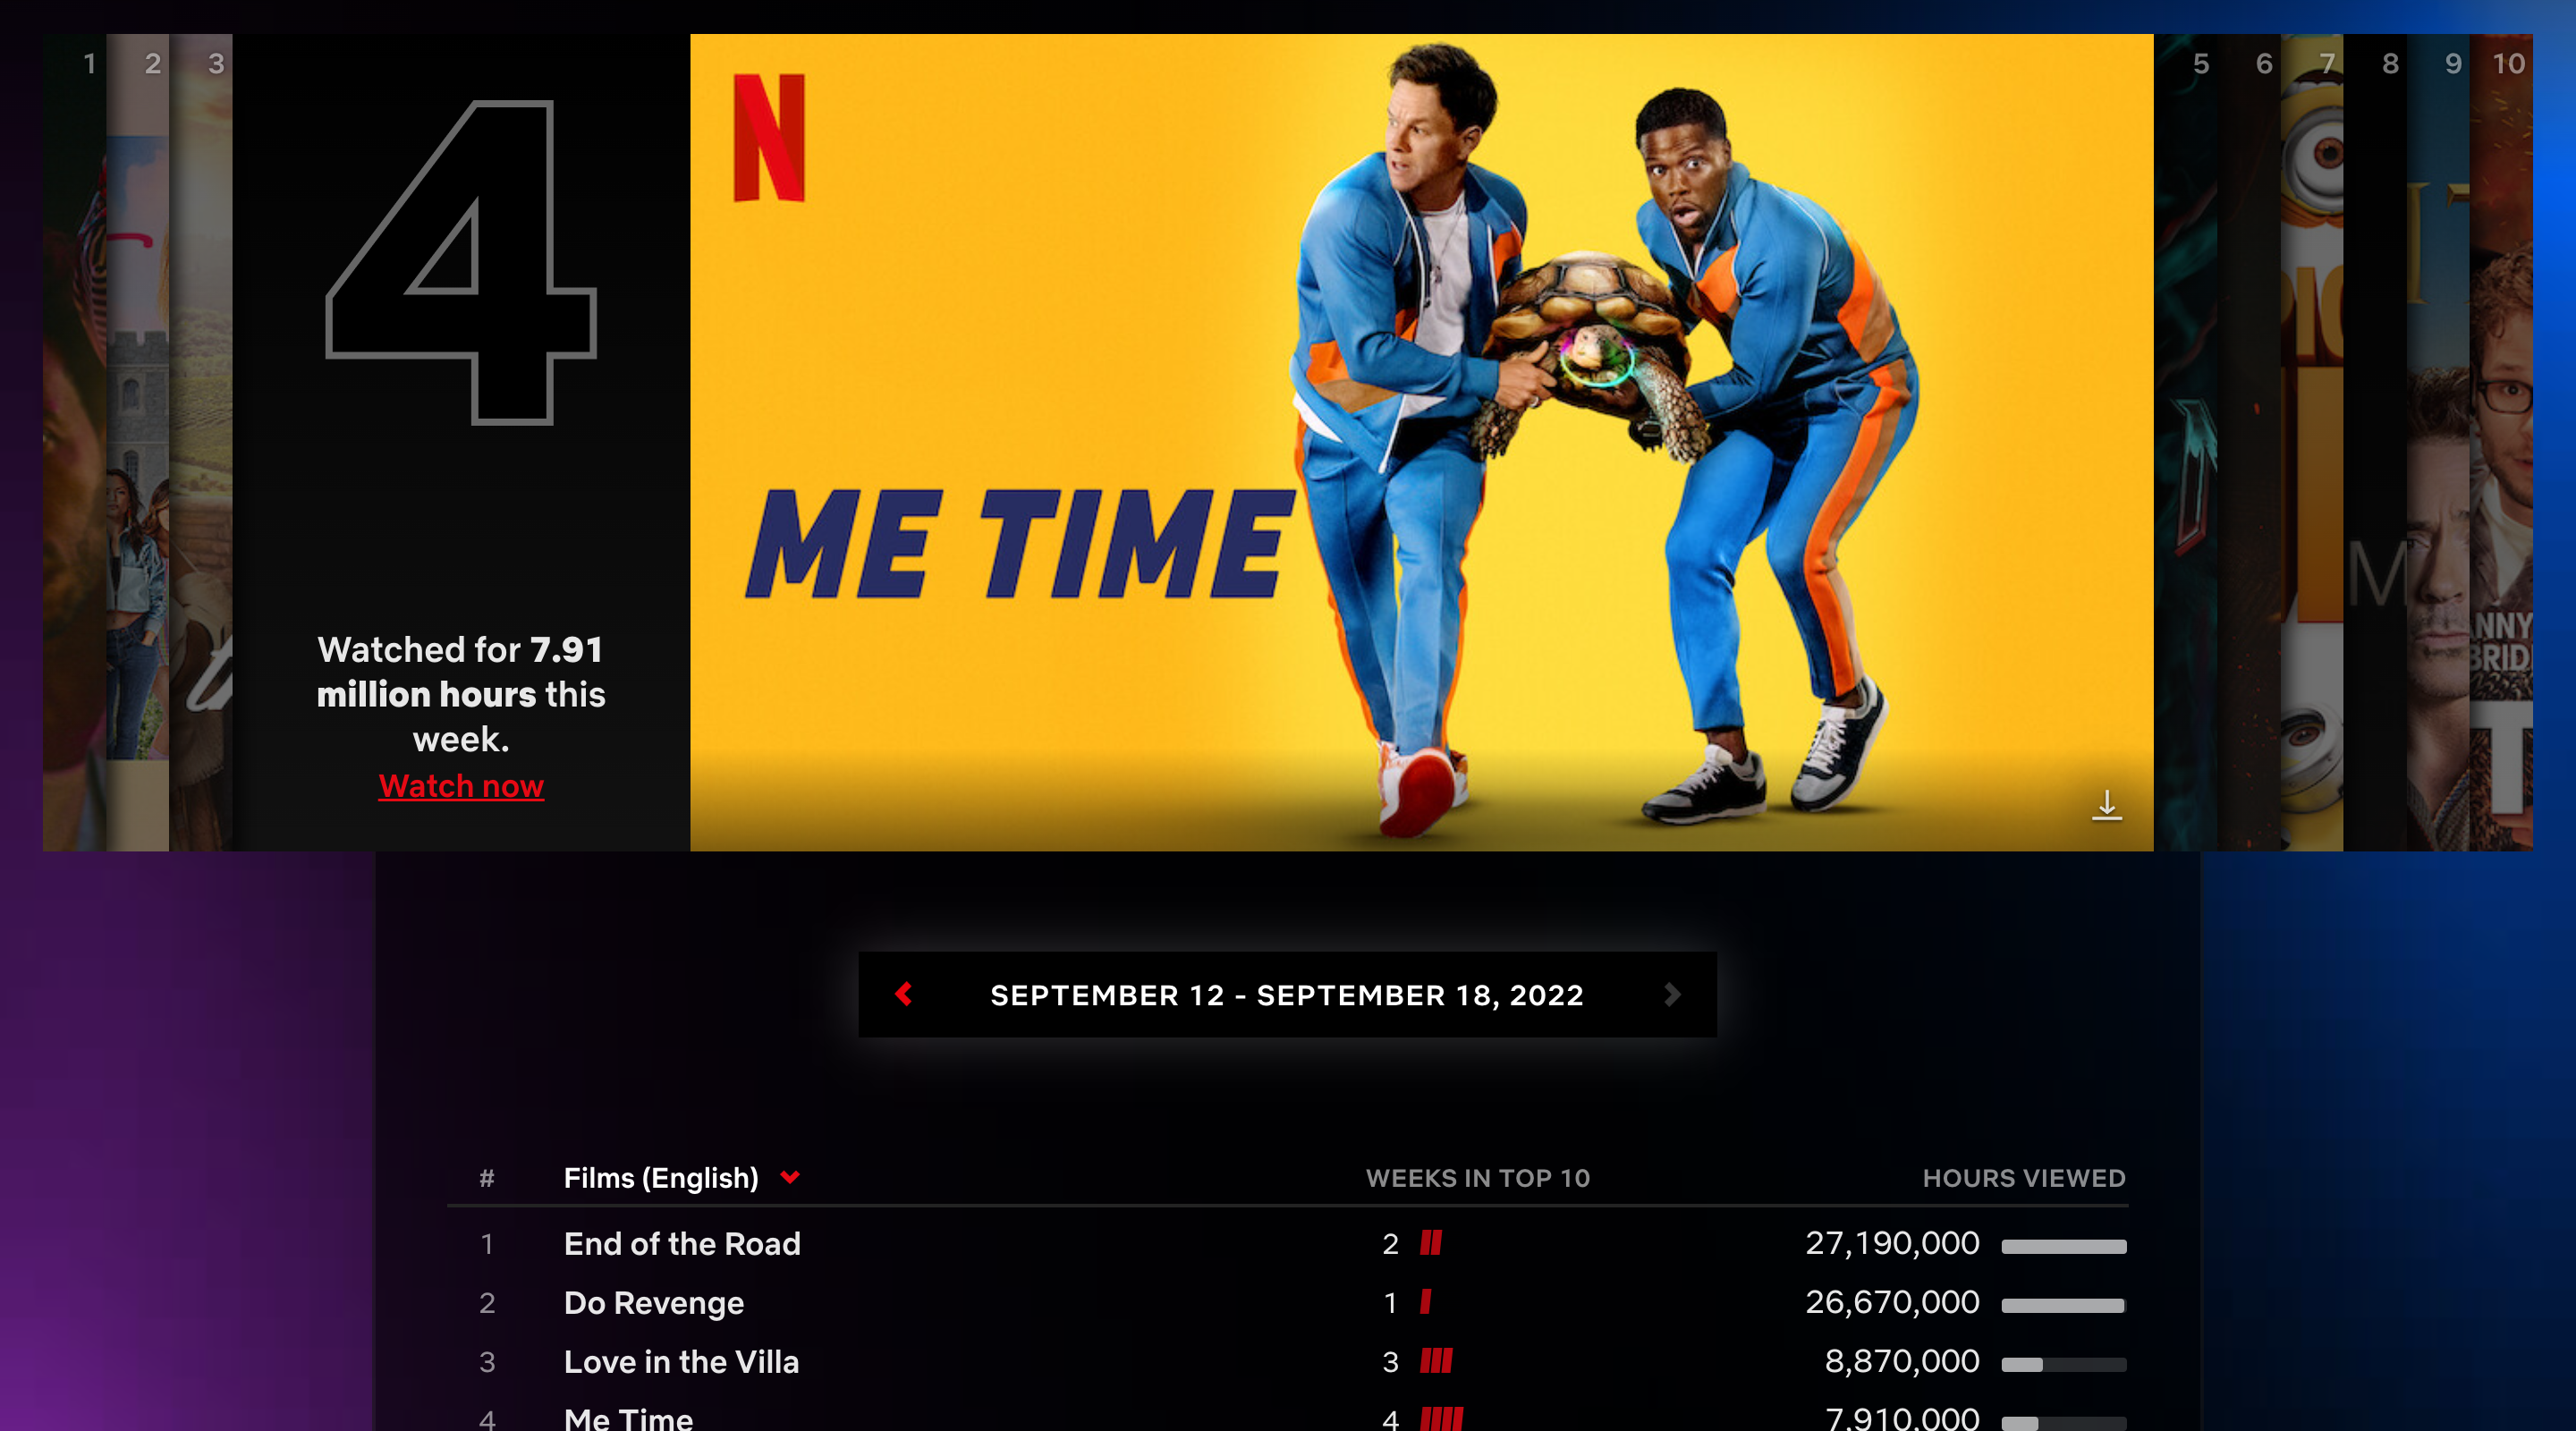 Screenshot of the Netflix Top 10 website. The visible section contains an image carousel showing the top 10 English films. The fourth image is active and the number four is displayed to the side in large text. Below the film titles are listed in order along with the total hours viewed for each.